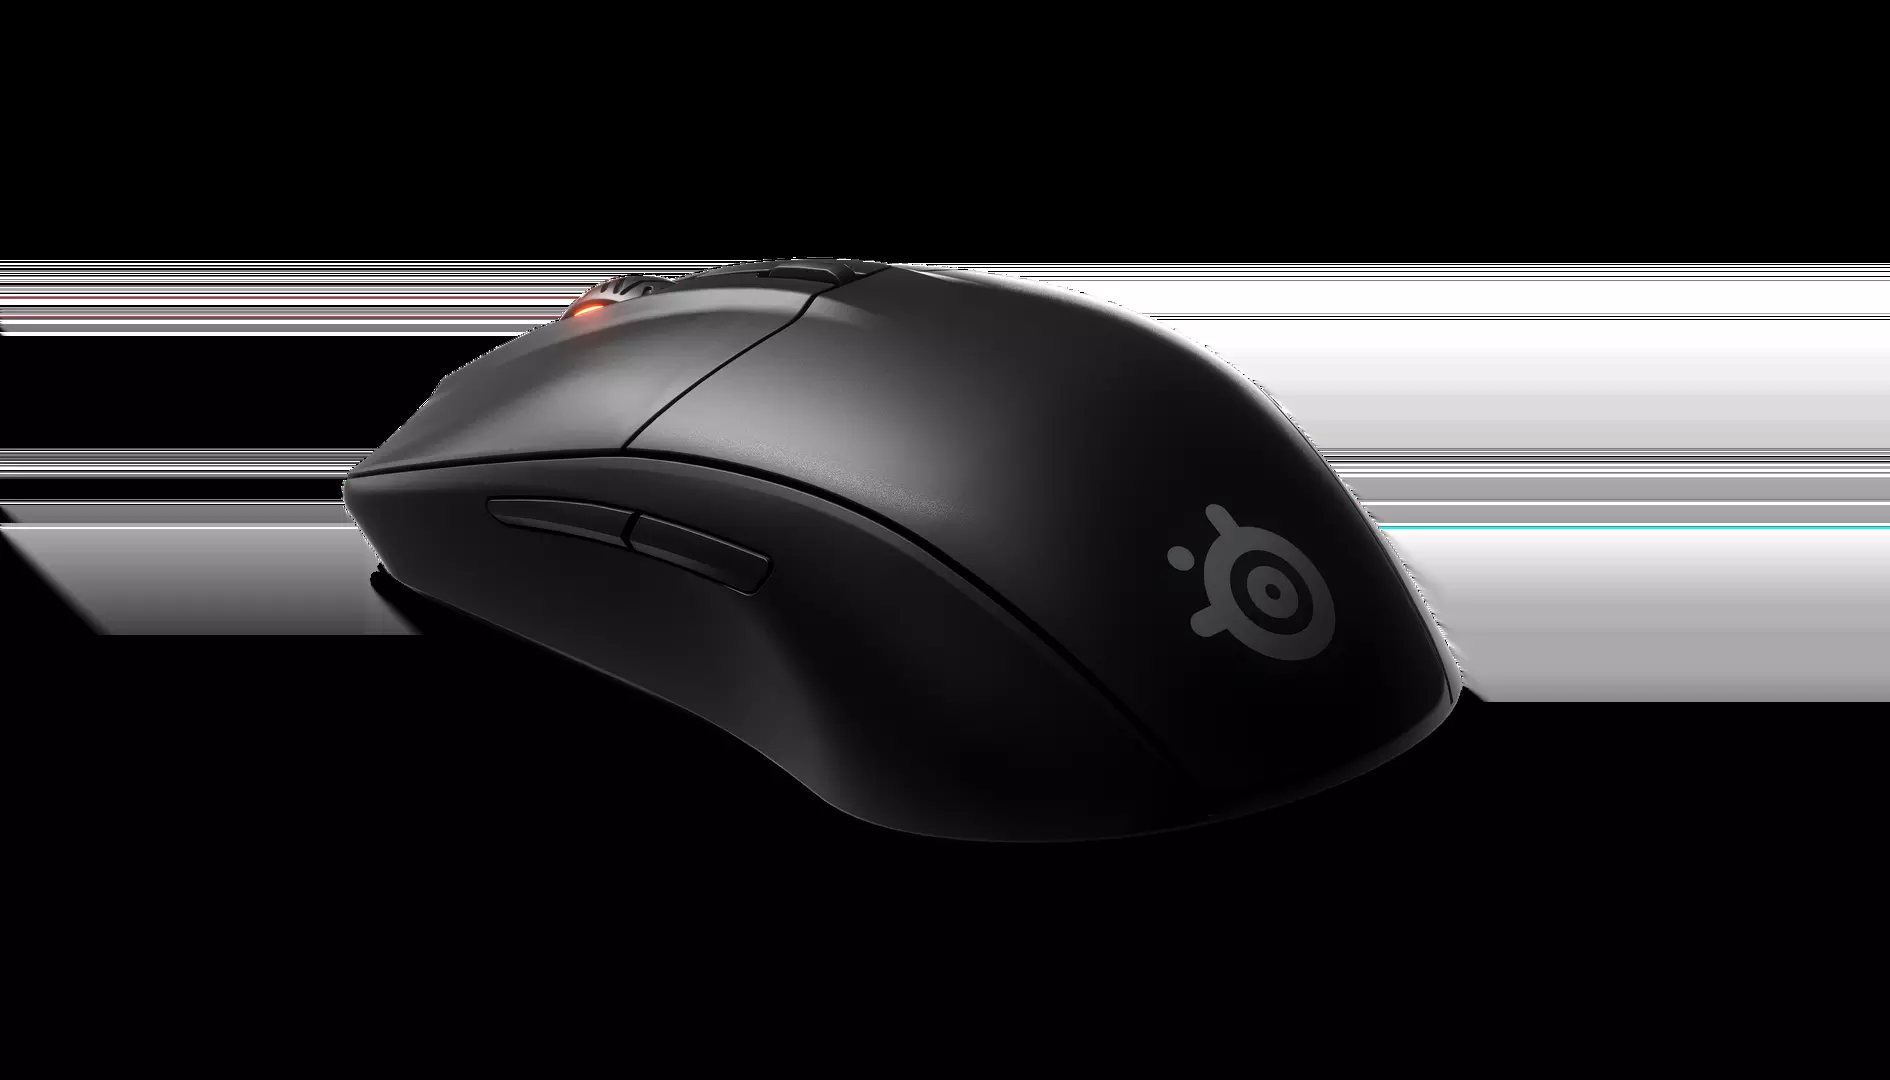 Steelseries Rival Wireless Gaming Mouse